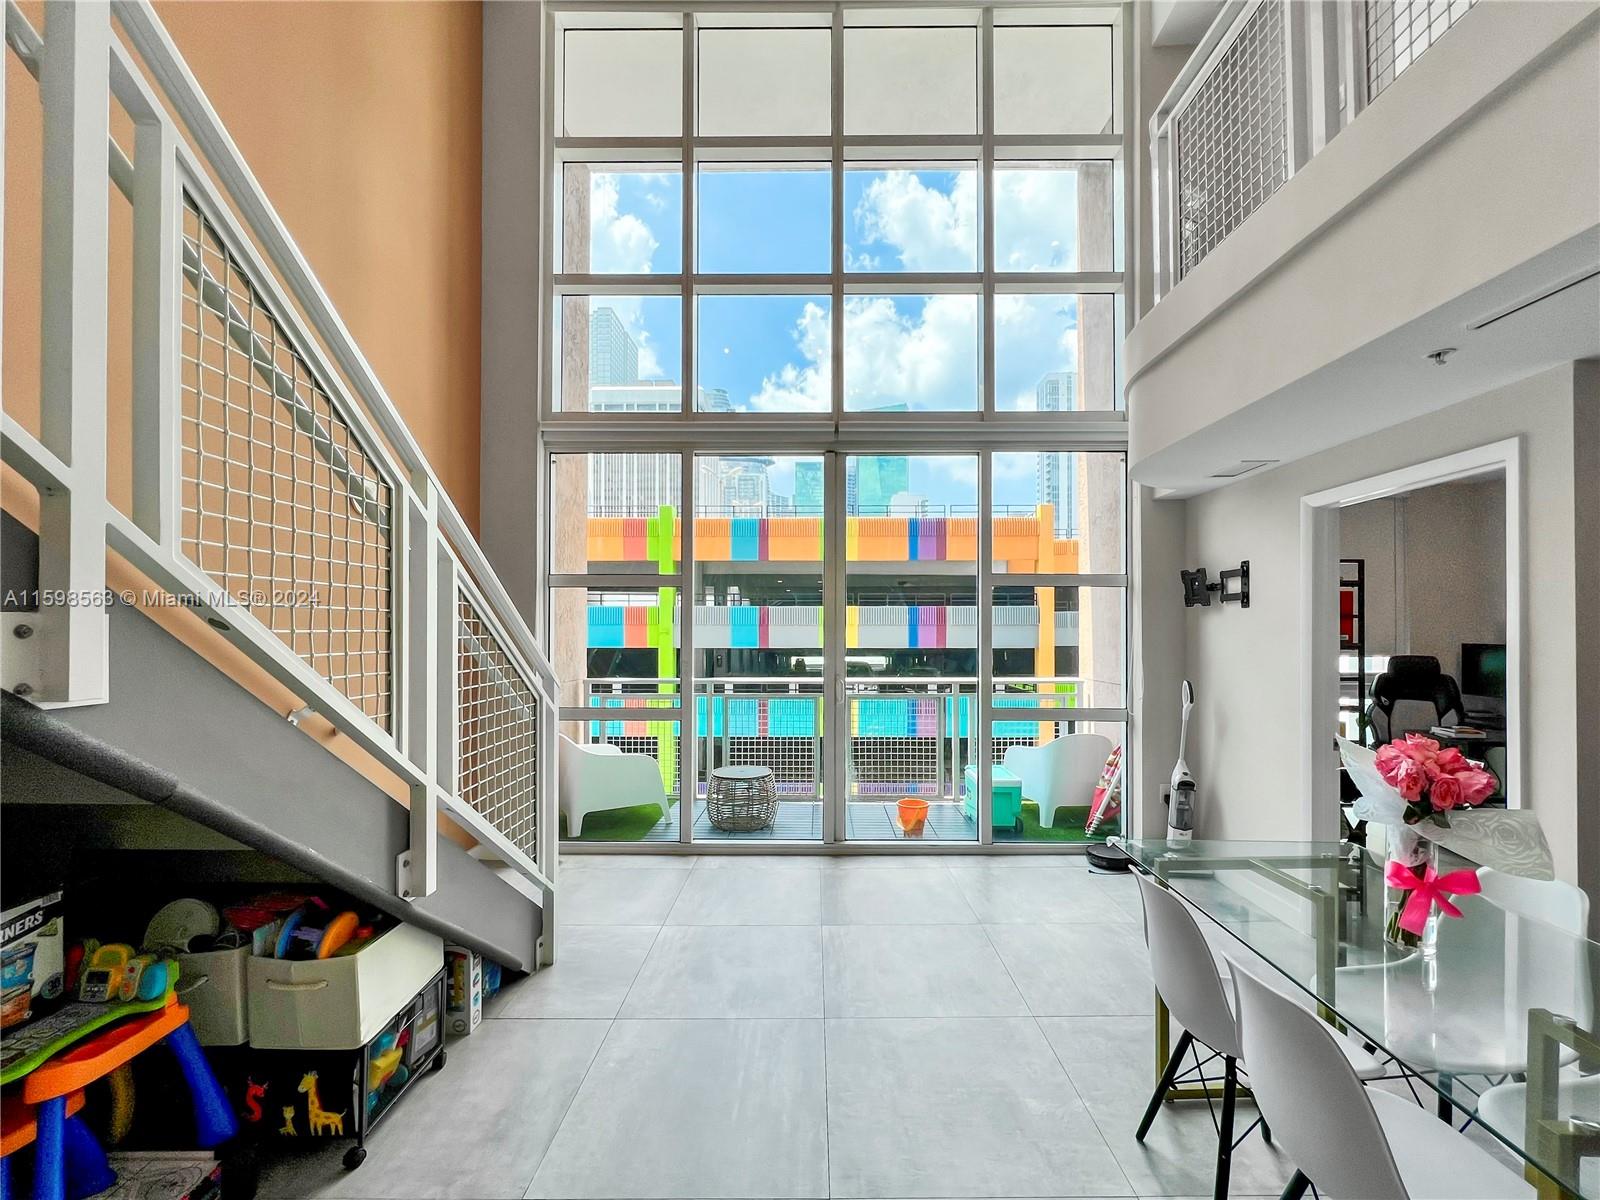 Welcome to this stunning, two-floor loft in the prestigious Vizcayne South Tower. This modern, spacious unit features 2 bedrooms, 1 den, 1.5 bathrooms, granite countertops, stainless steel appliances, in-unit washer and dryer, and its own storage space. The Vizcayne South Tower offers unparalleled amenities, including three pools, a Jacuzzi, a sauna, a gym, a cold plunge, massage rooms, and fitness classes. Perfect for investors, the unit can be rented up to 12 times a year. Enjoy the ultimate convenience with your parking spot right next to the unit, allowing for easy access as if walking into your own garage. Located near the American Airlines Arena, Wynwood Walls, and local shops and diners. Schedule a showing today and experience luxury living at its finest!